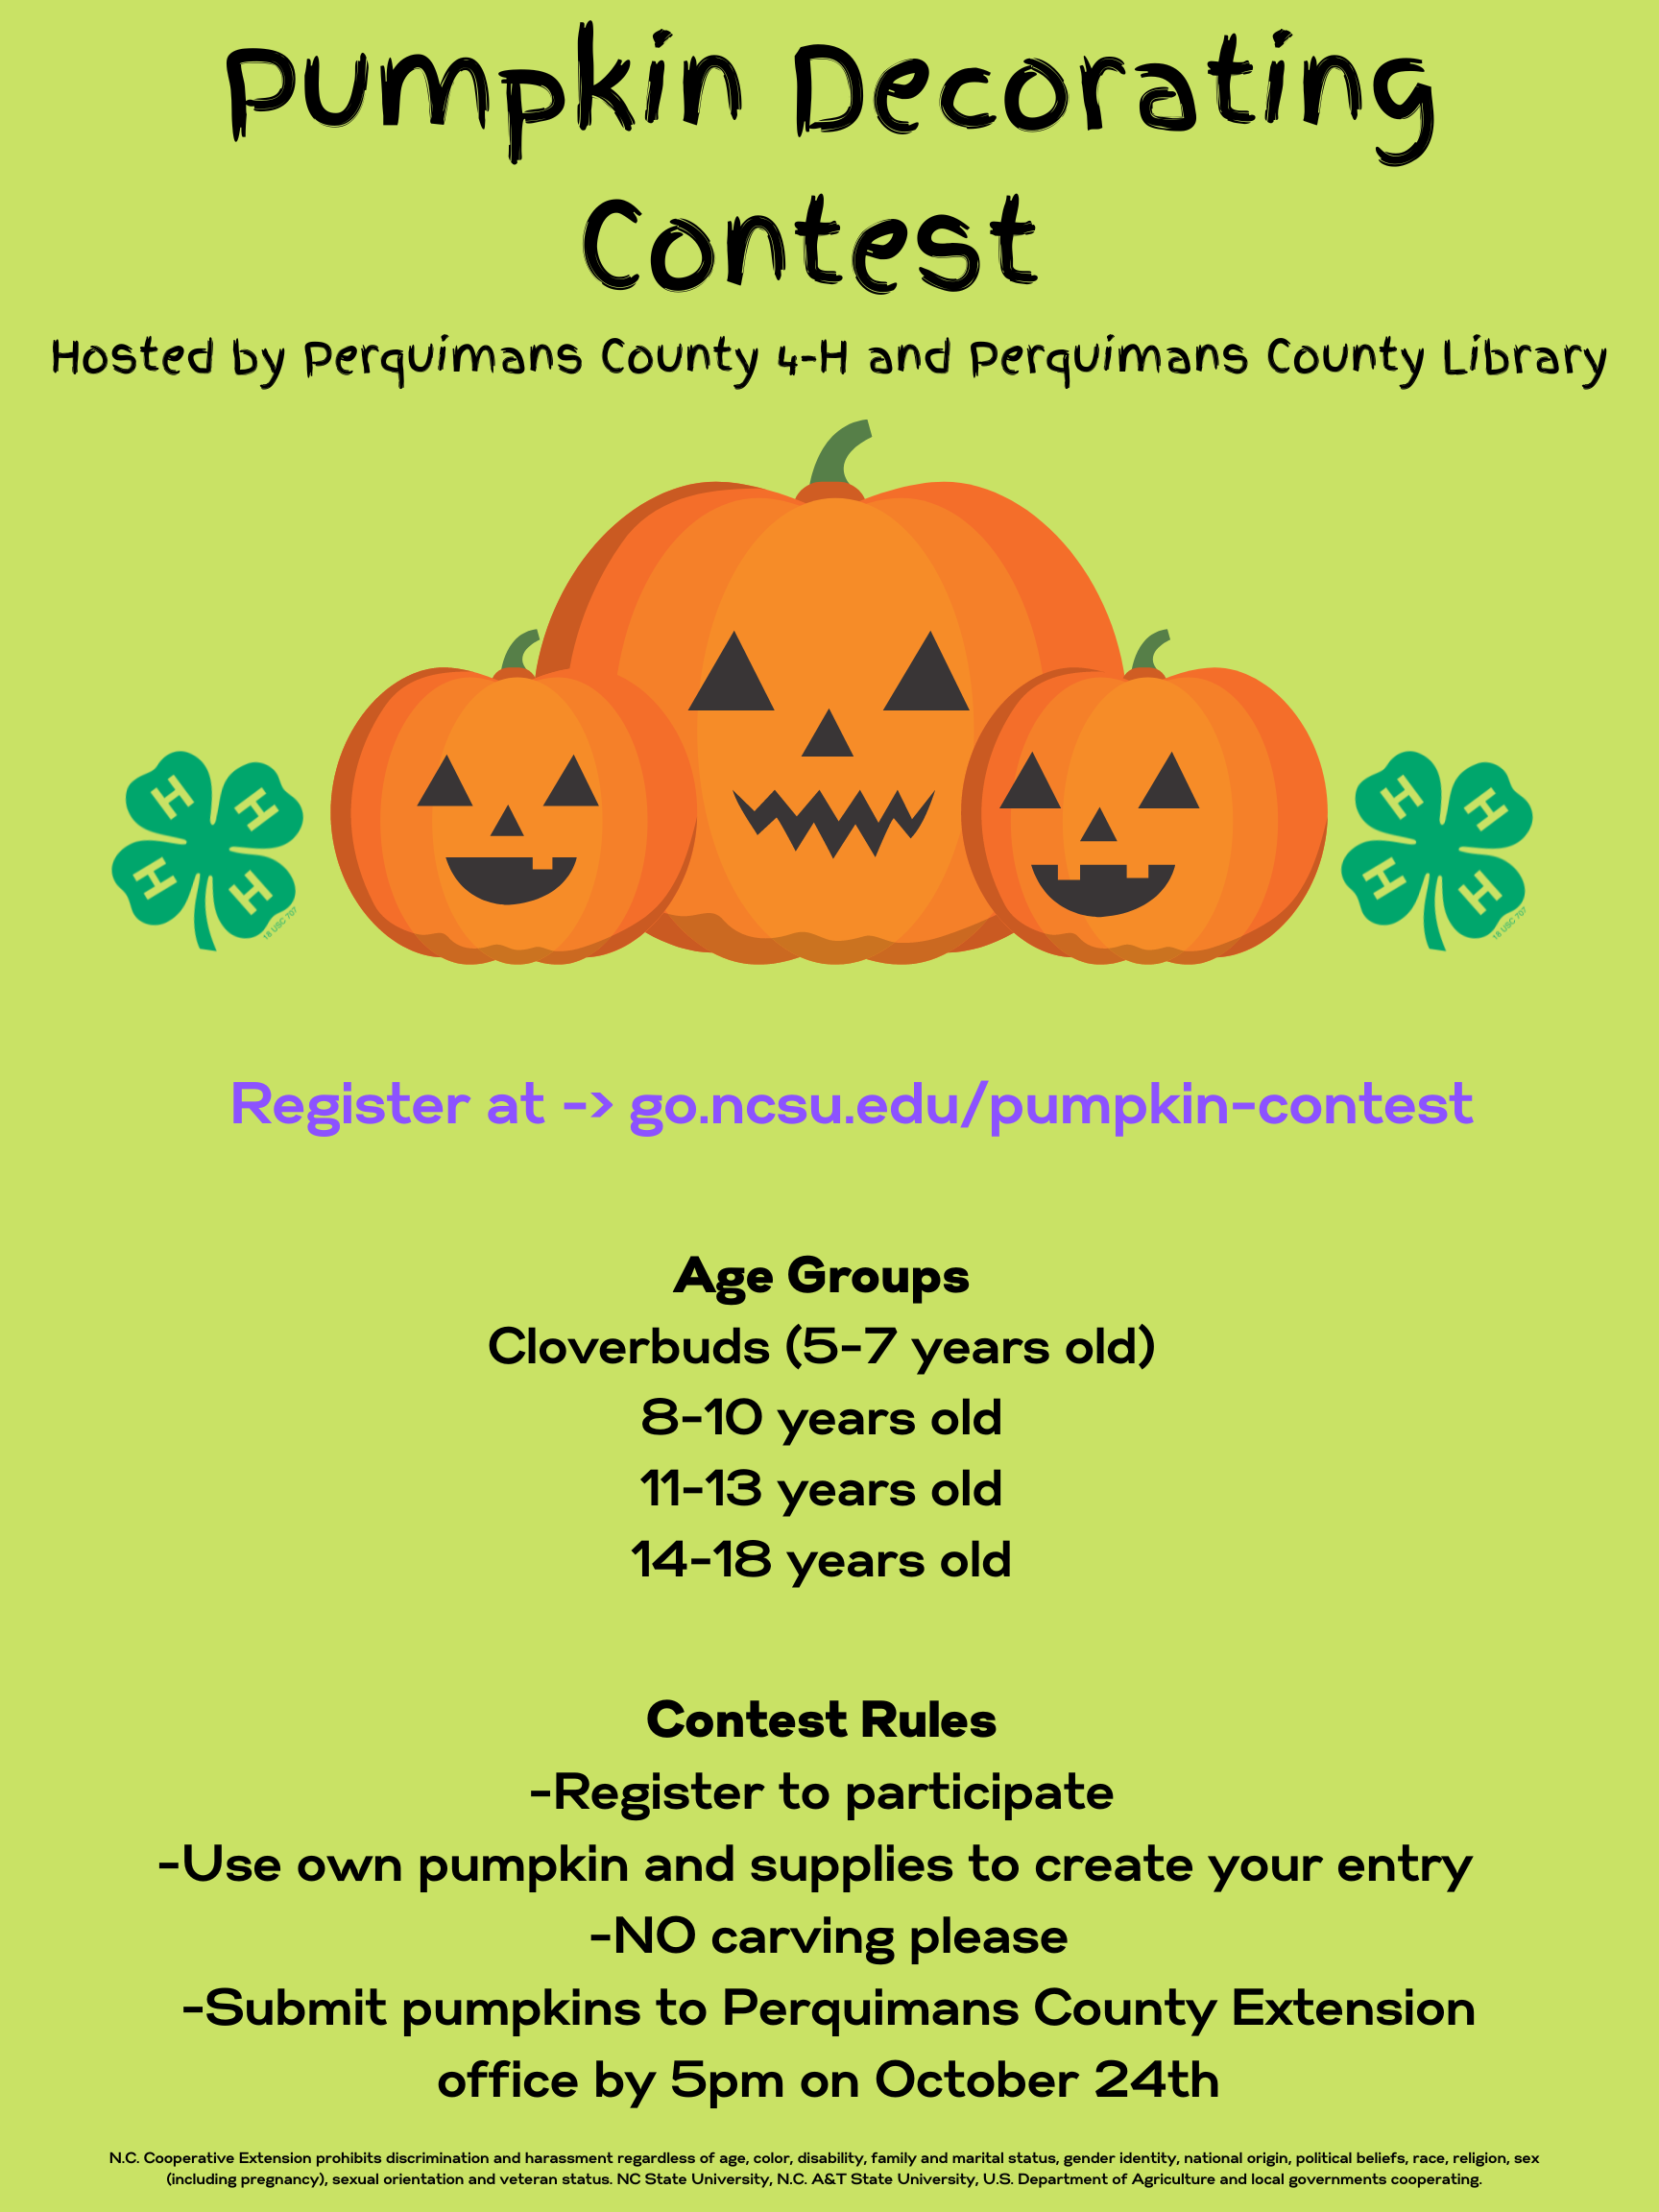 4-H Pumpkin Decorating Contest Extension Marketing and Communications picture pic